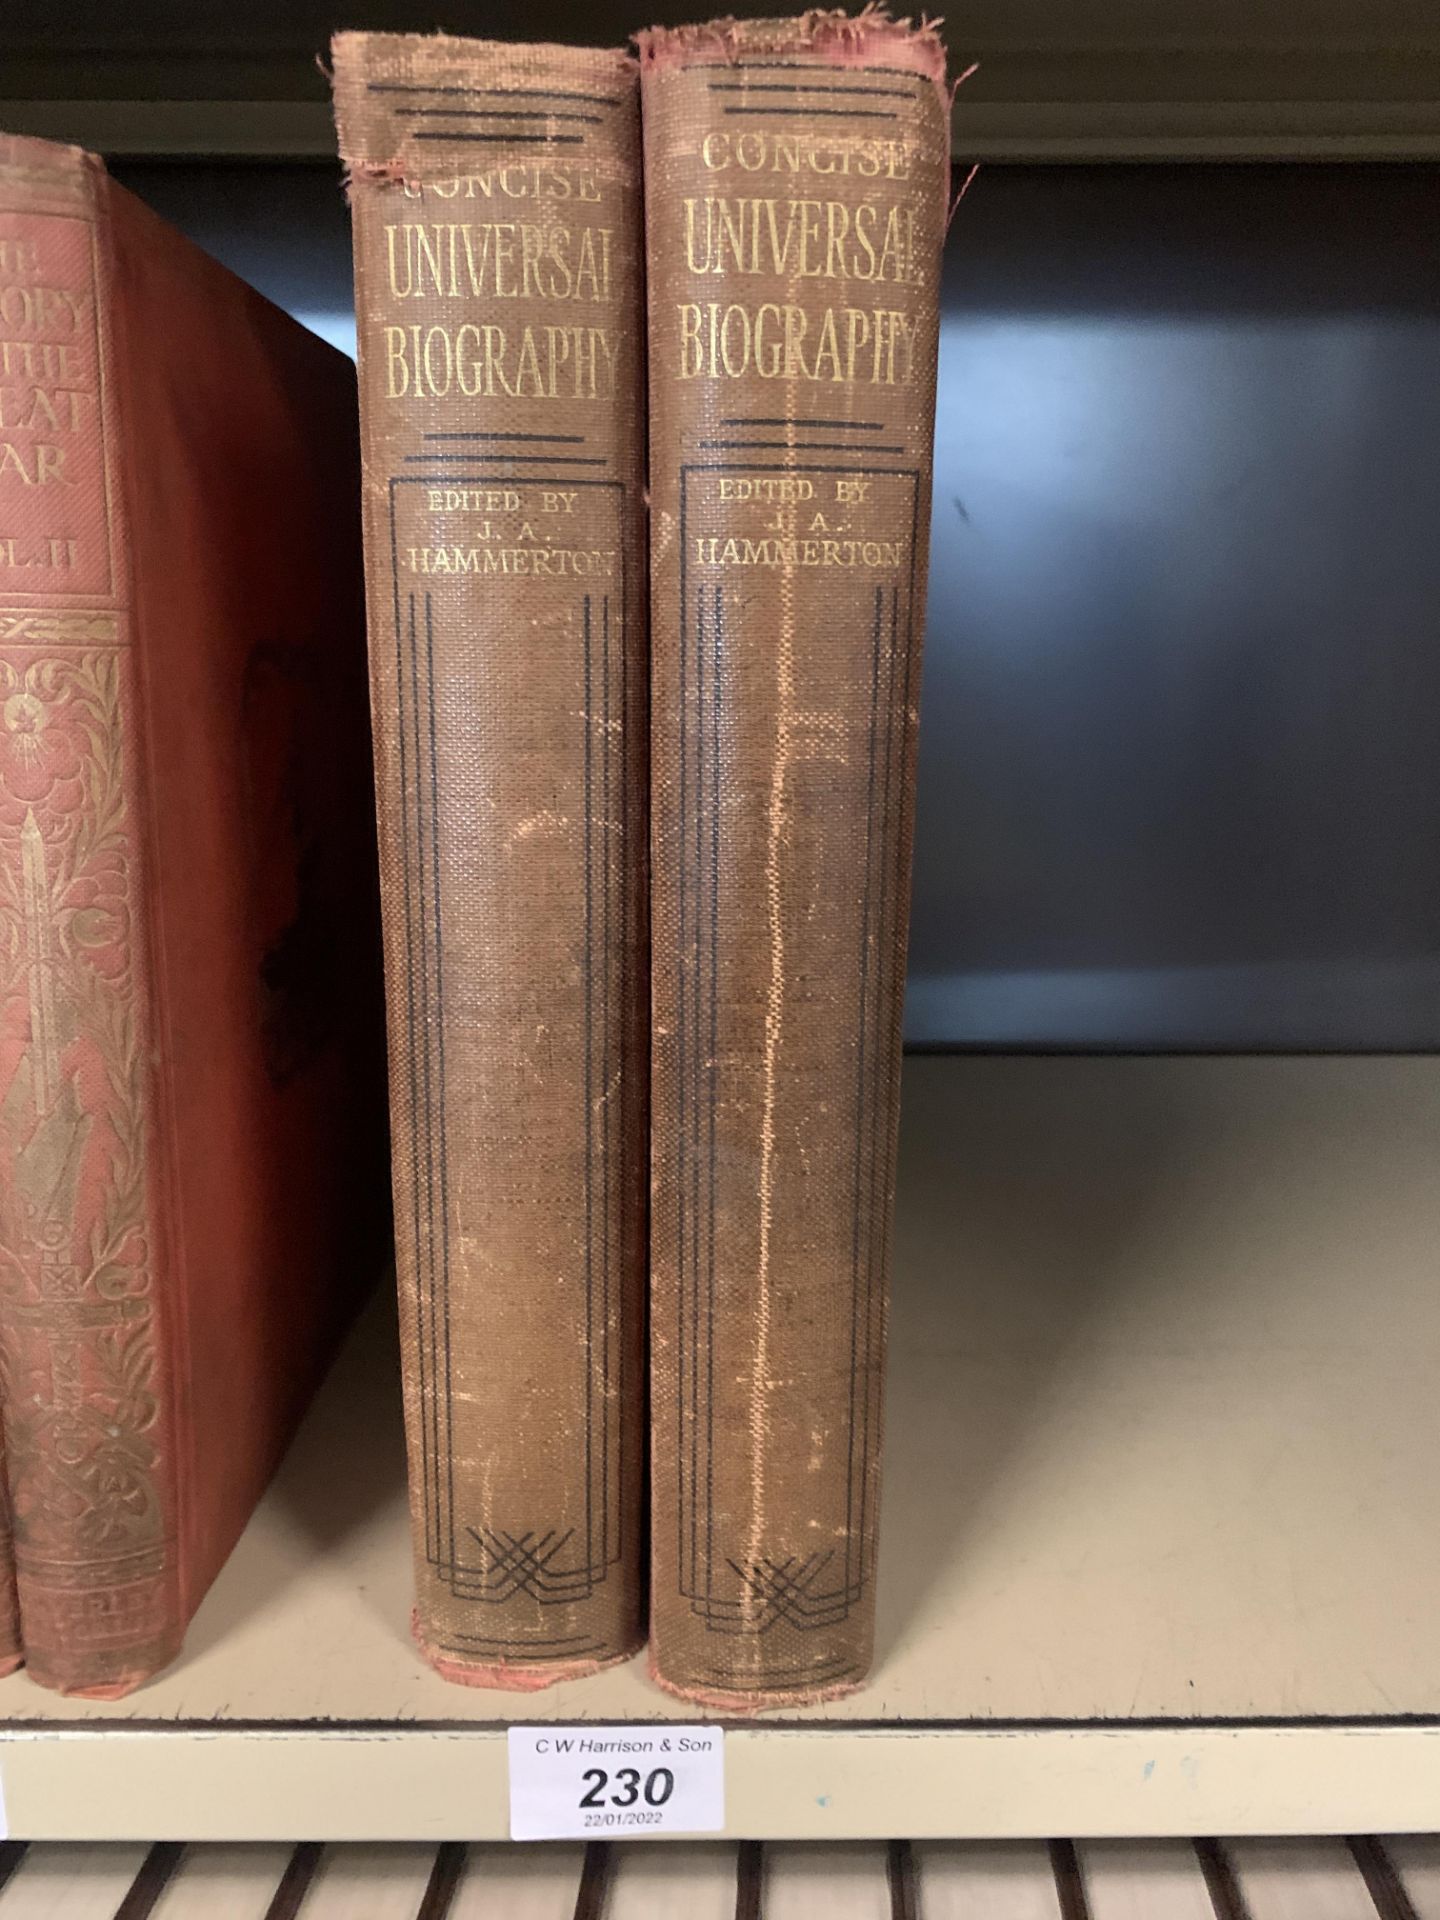 Volumes 1 and 2 of Concise Universal biography - Image 2 of 2